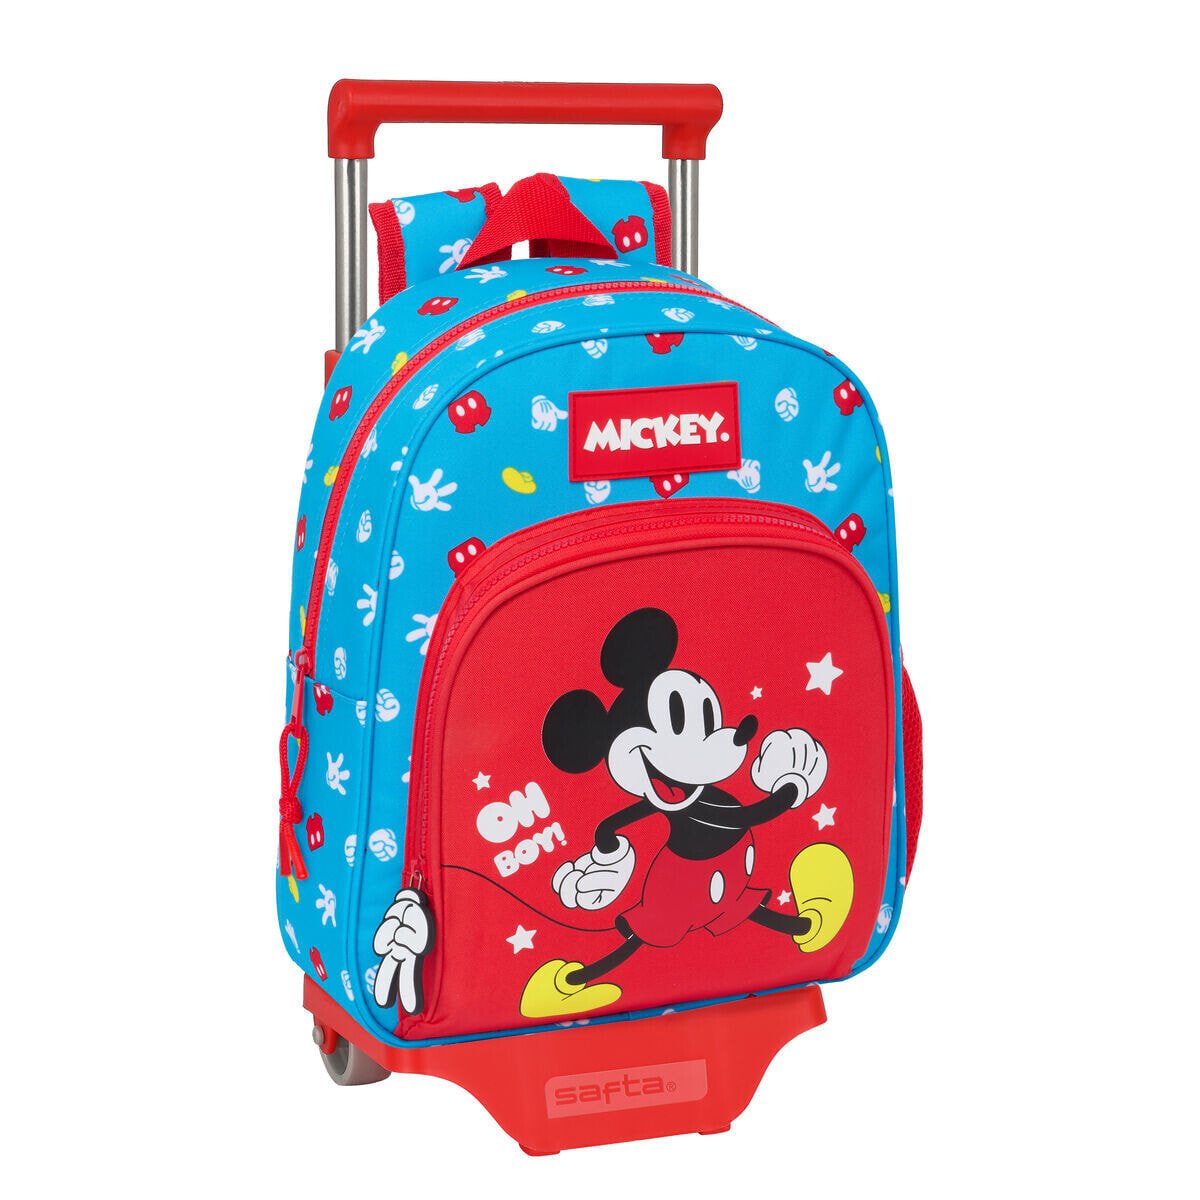 School Rucksack with Wheels Mickey Mouse Clubhouse Fantastic Blue Red 28 x 34 x 10 cm